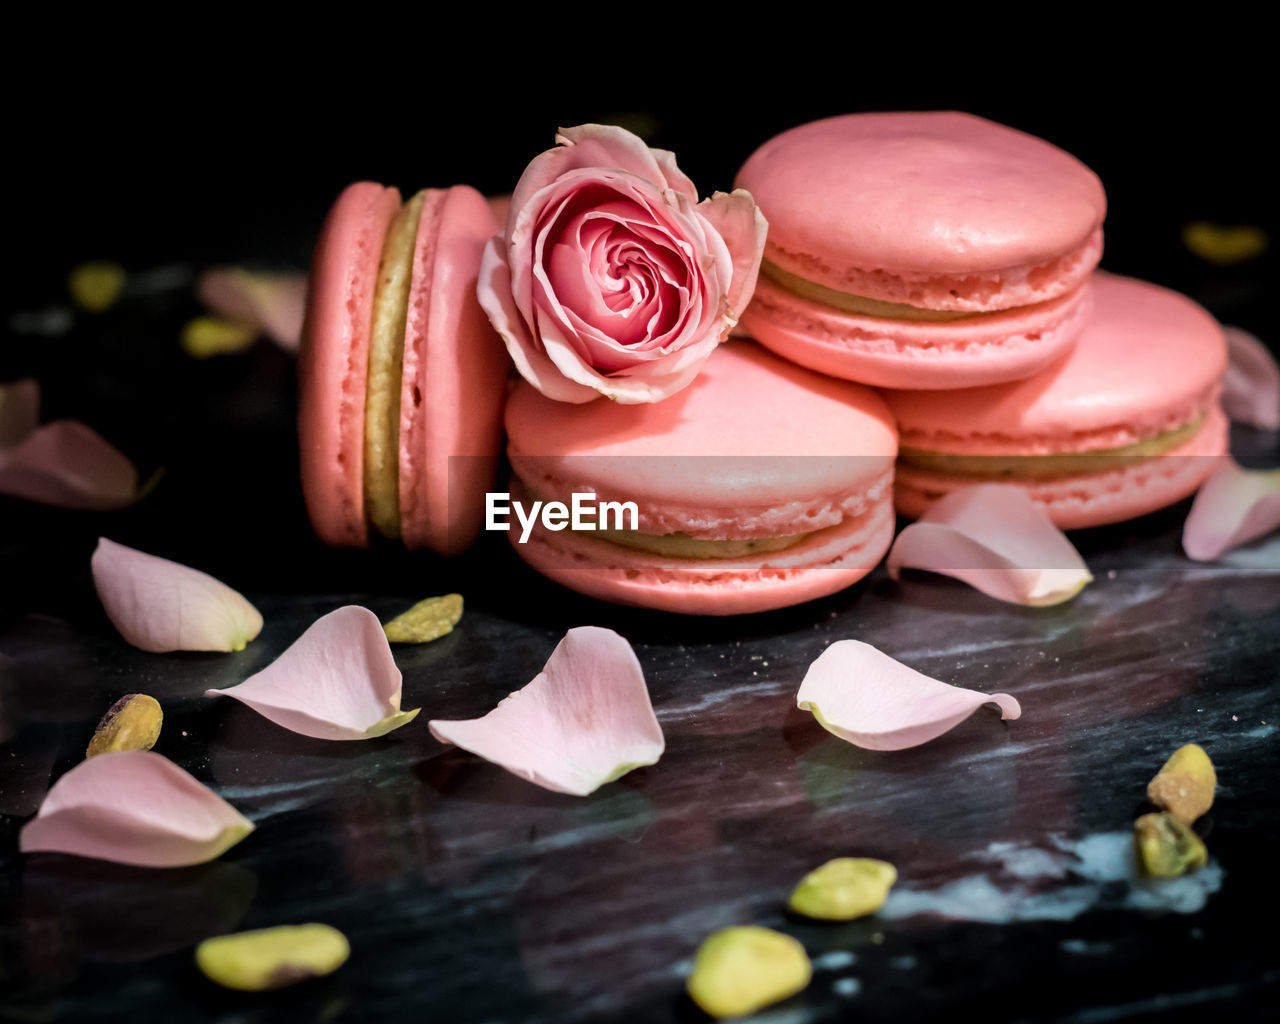 Pink pistachio rose macarons against a black background